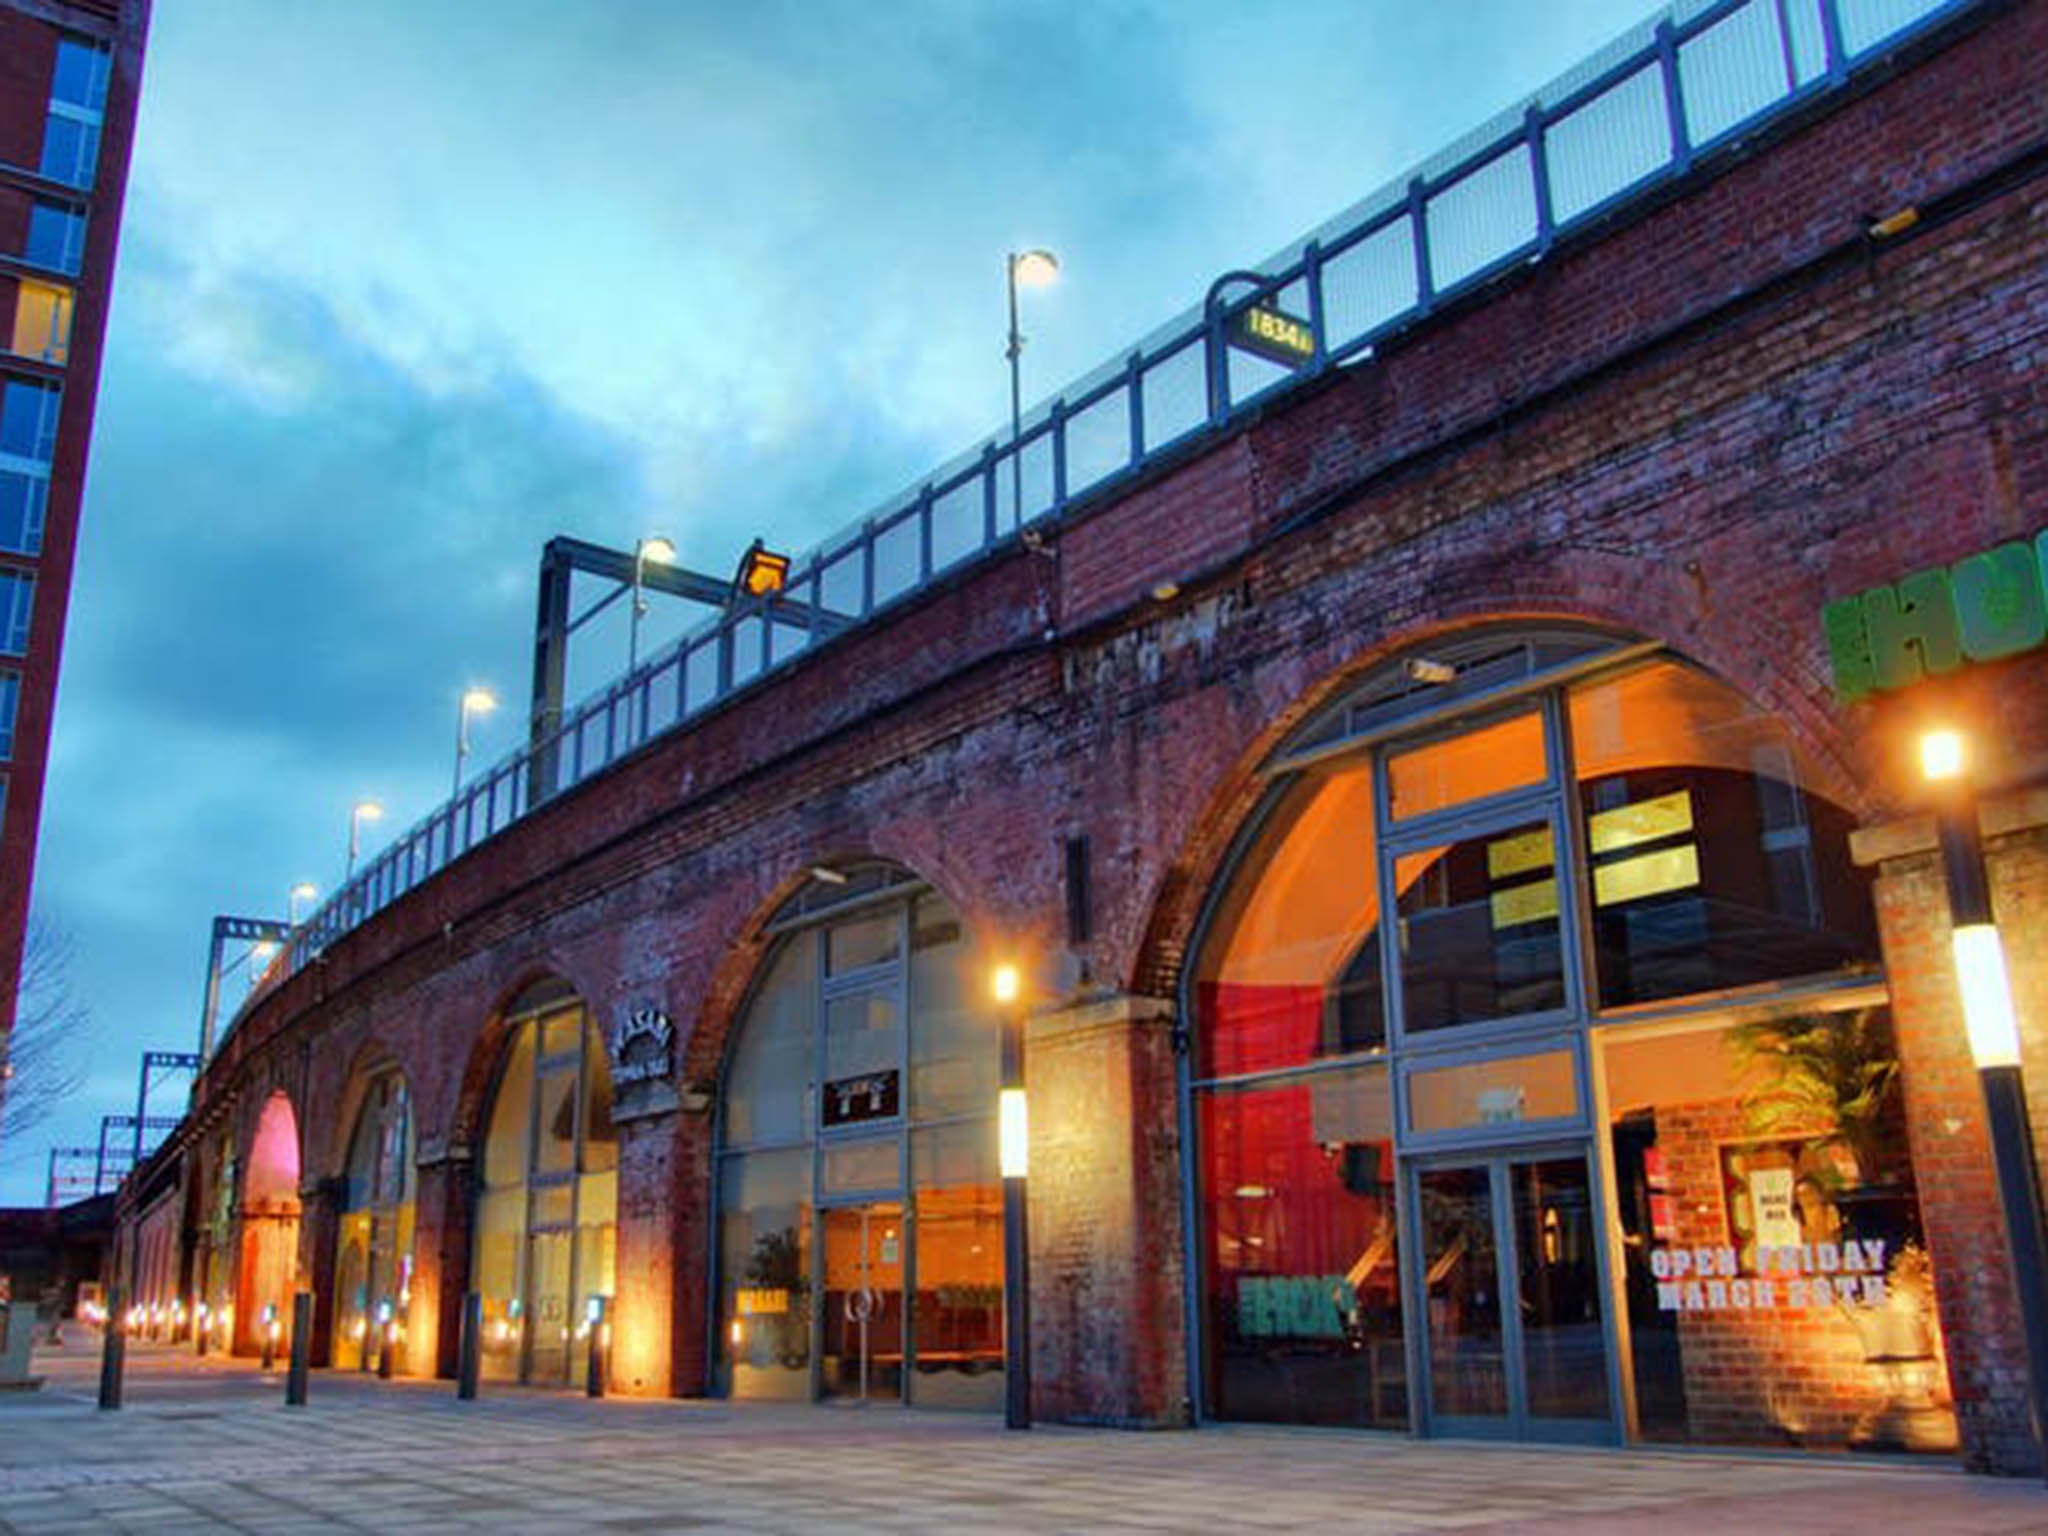 Railway arches that have been taken over by larger corporations in London